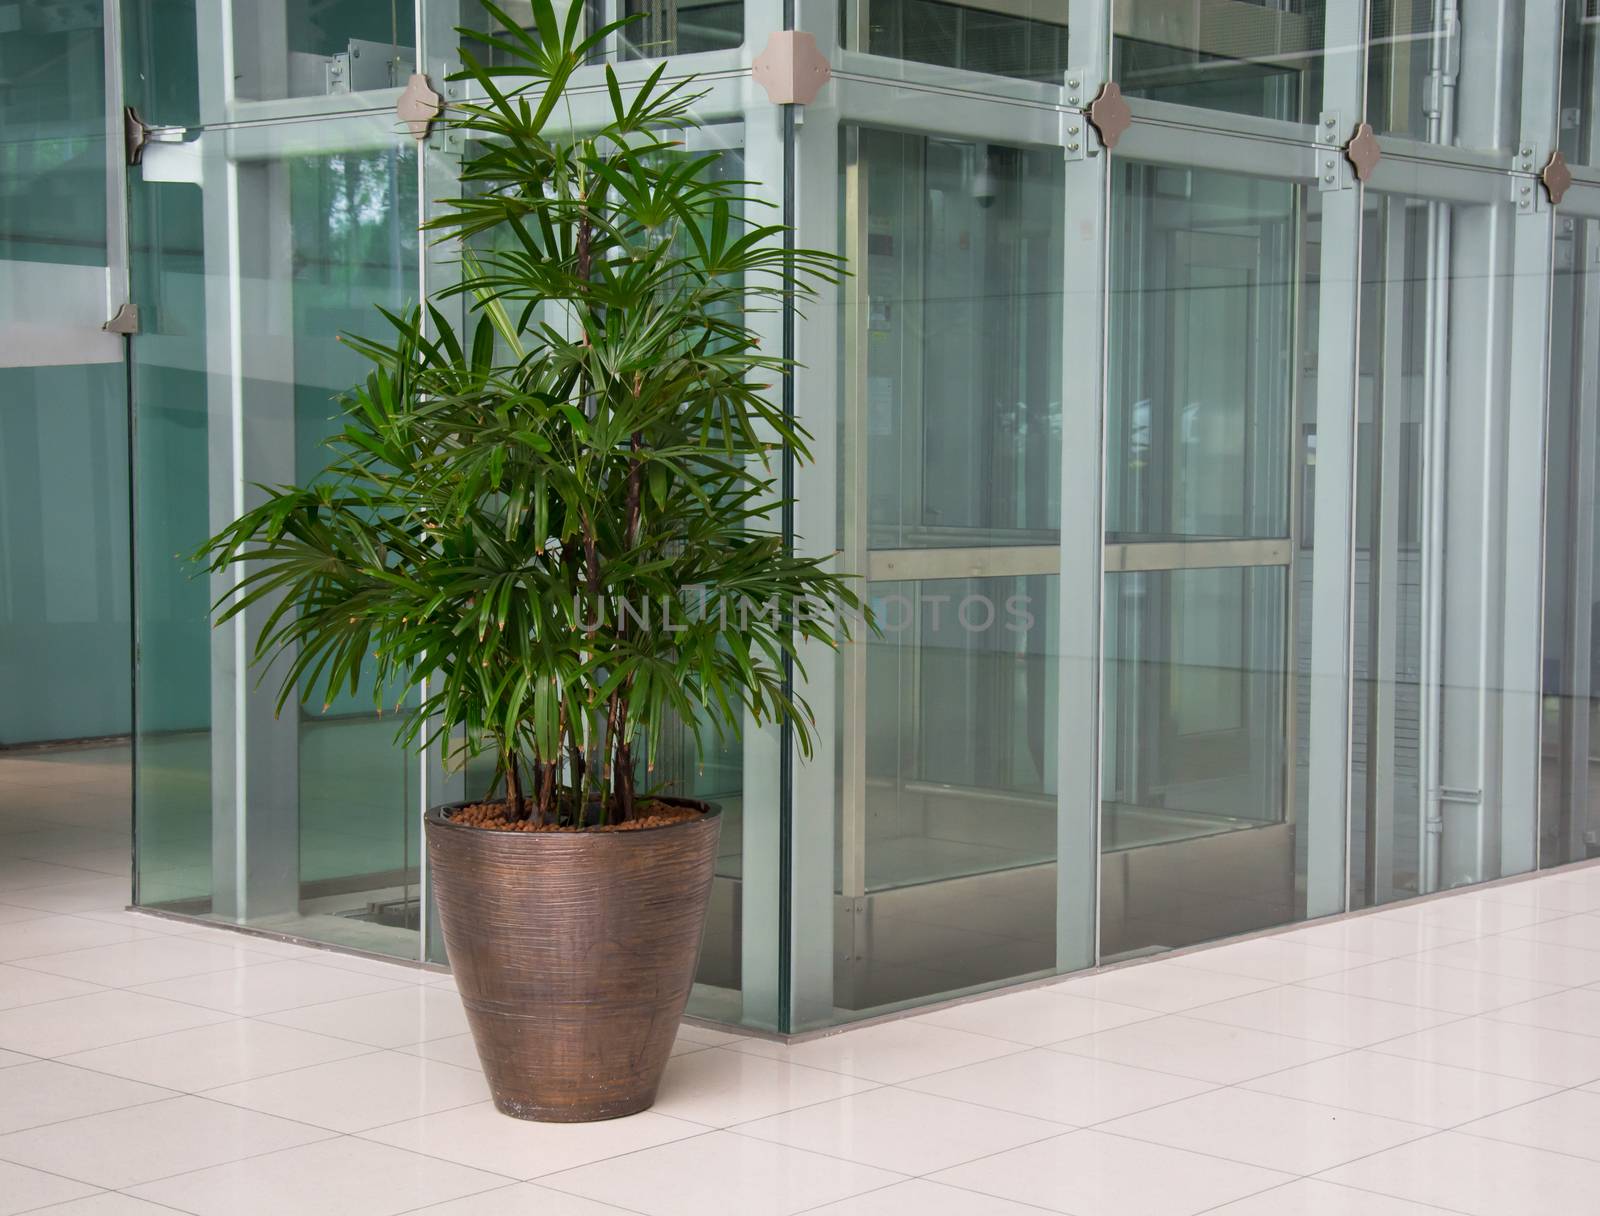 Office corridor with palm trees in pots by shutterbird